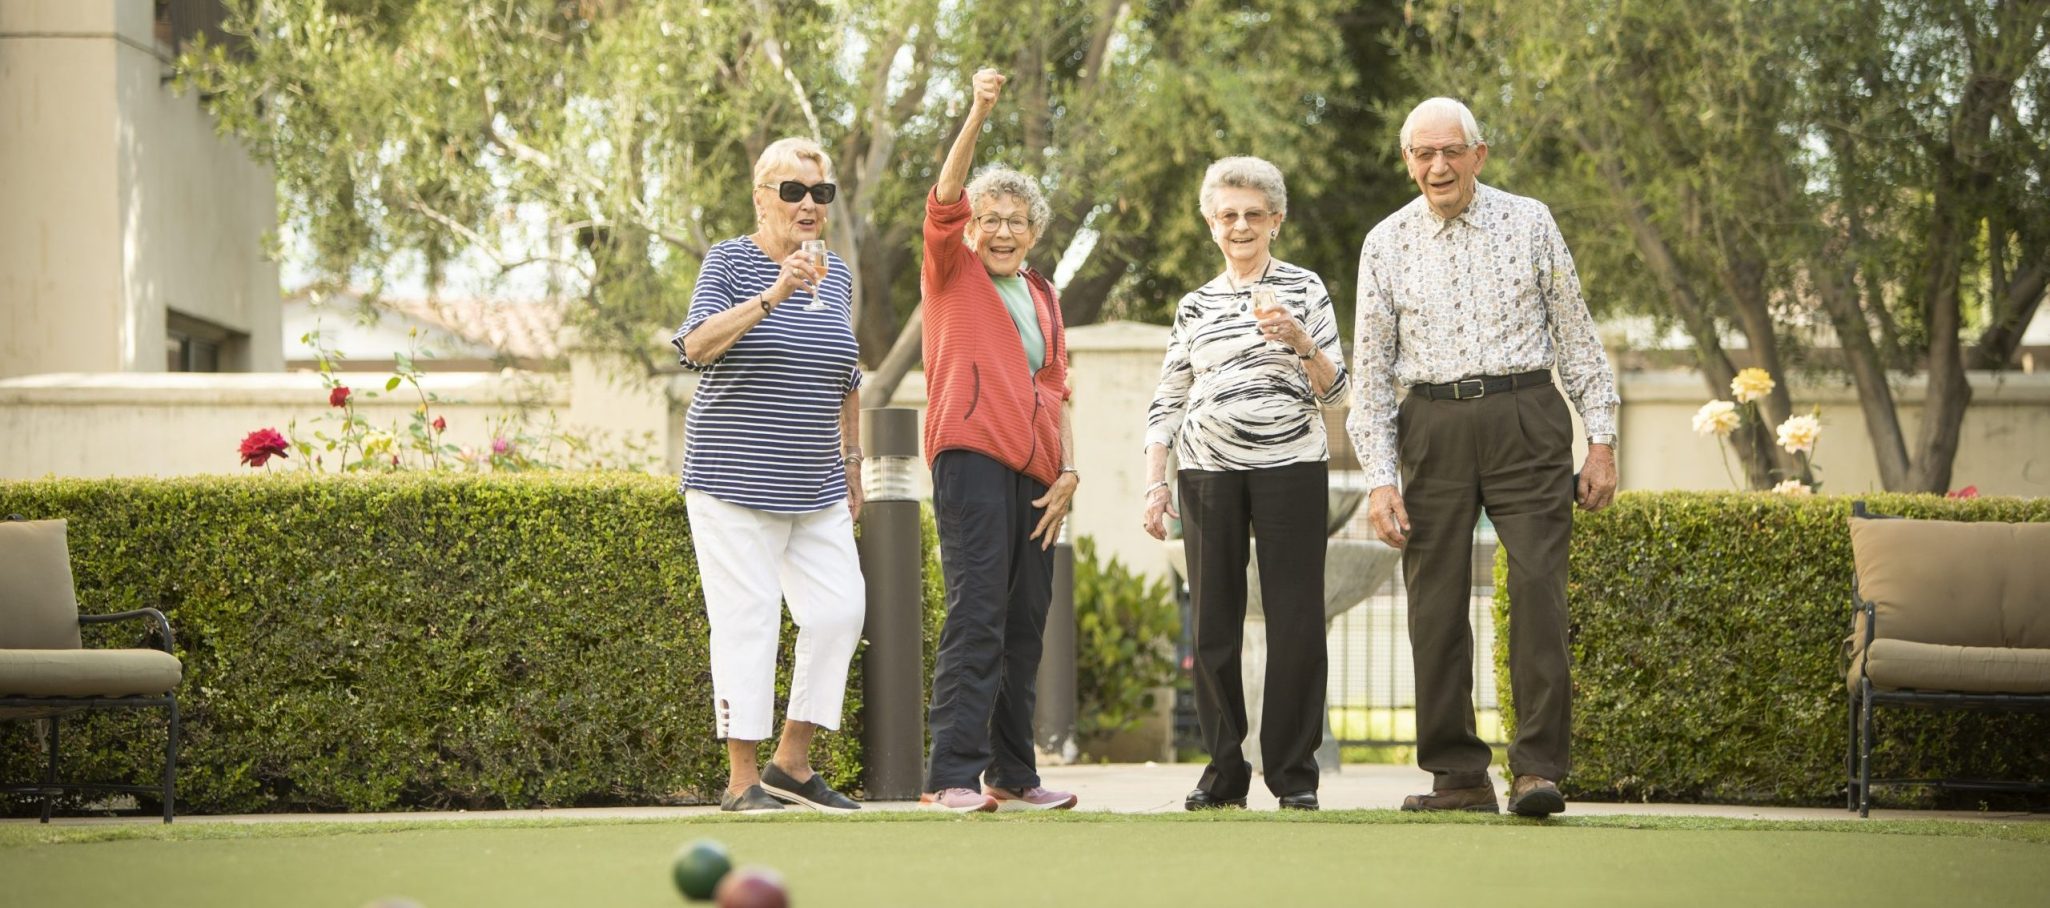 four active elderly people excited and playing croquet